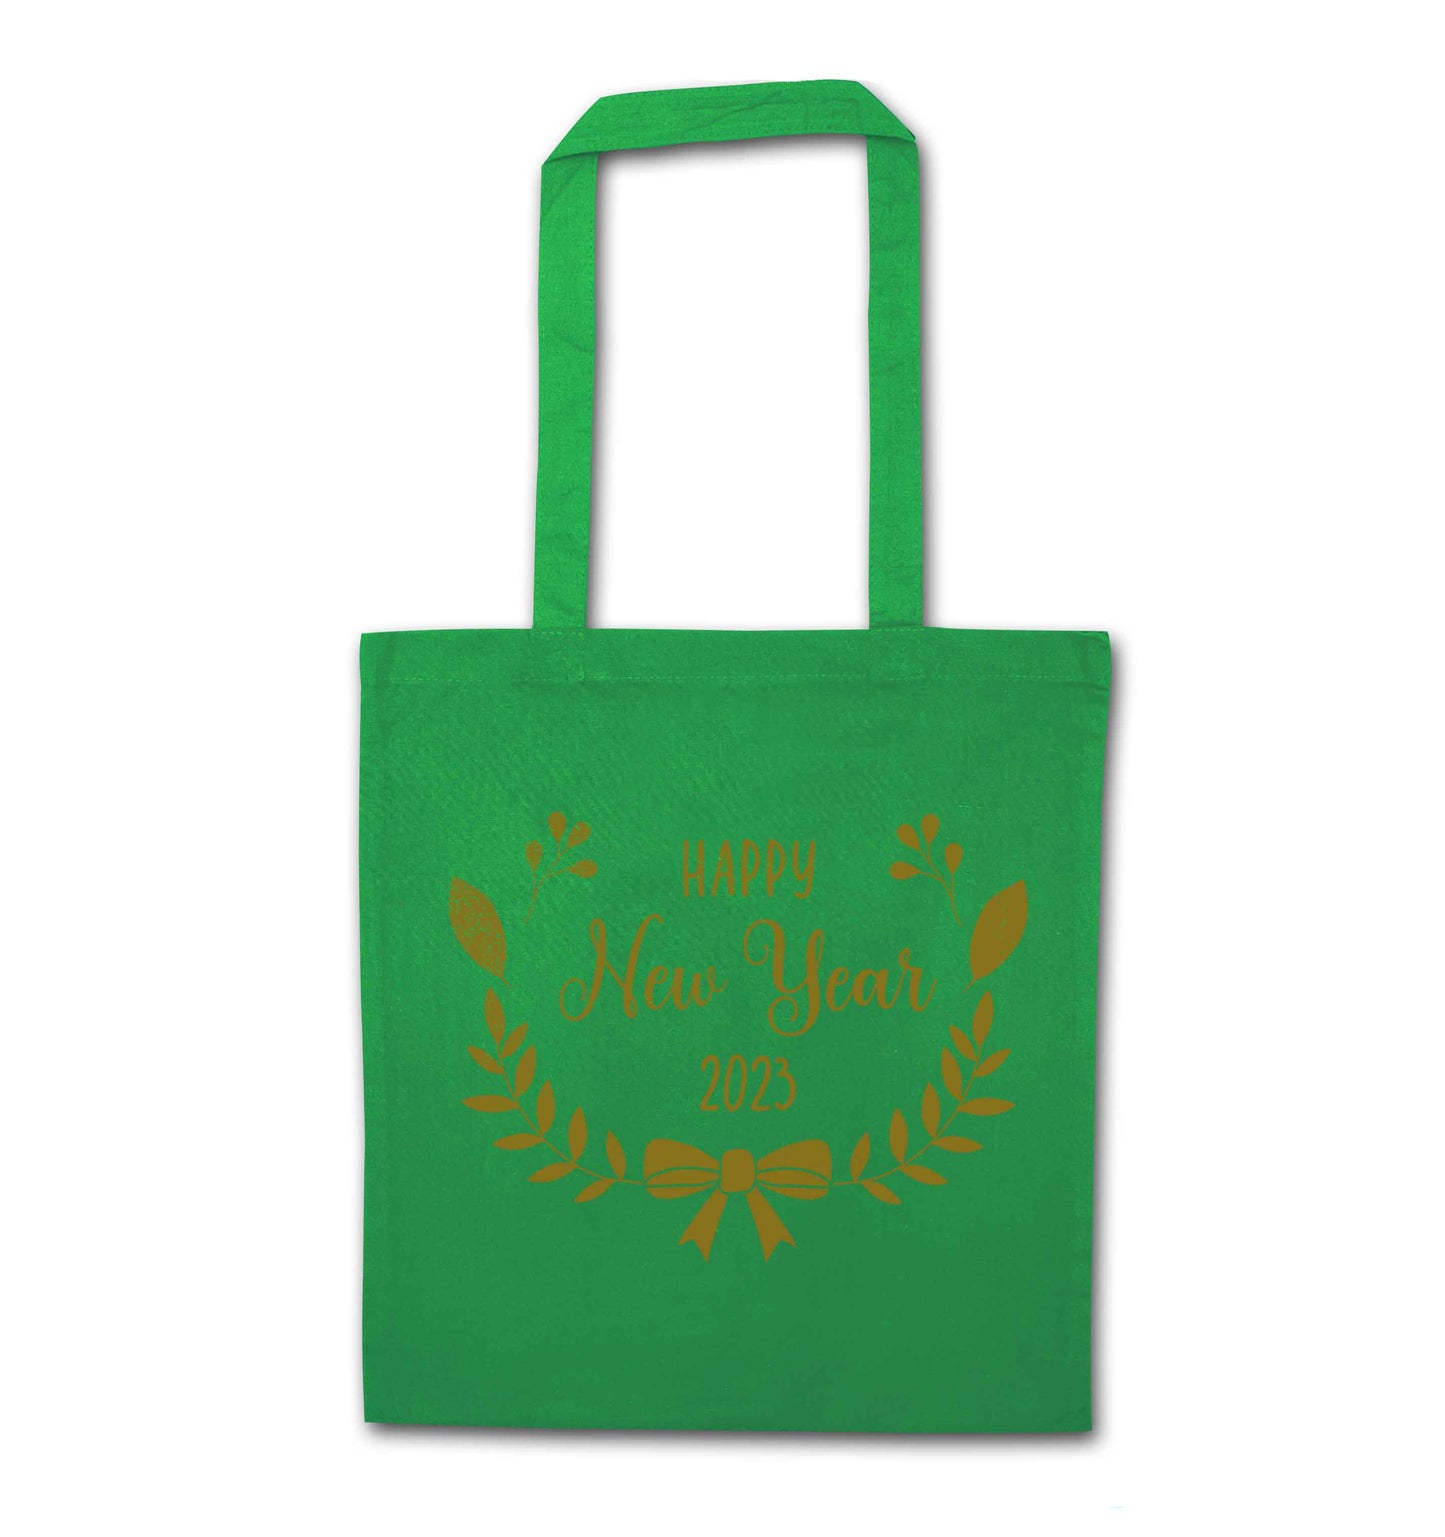 Happy New Year 2023 green tote bag